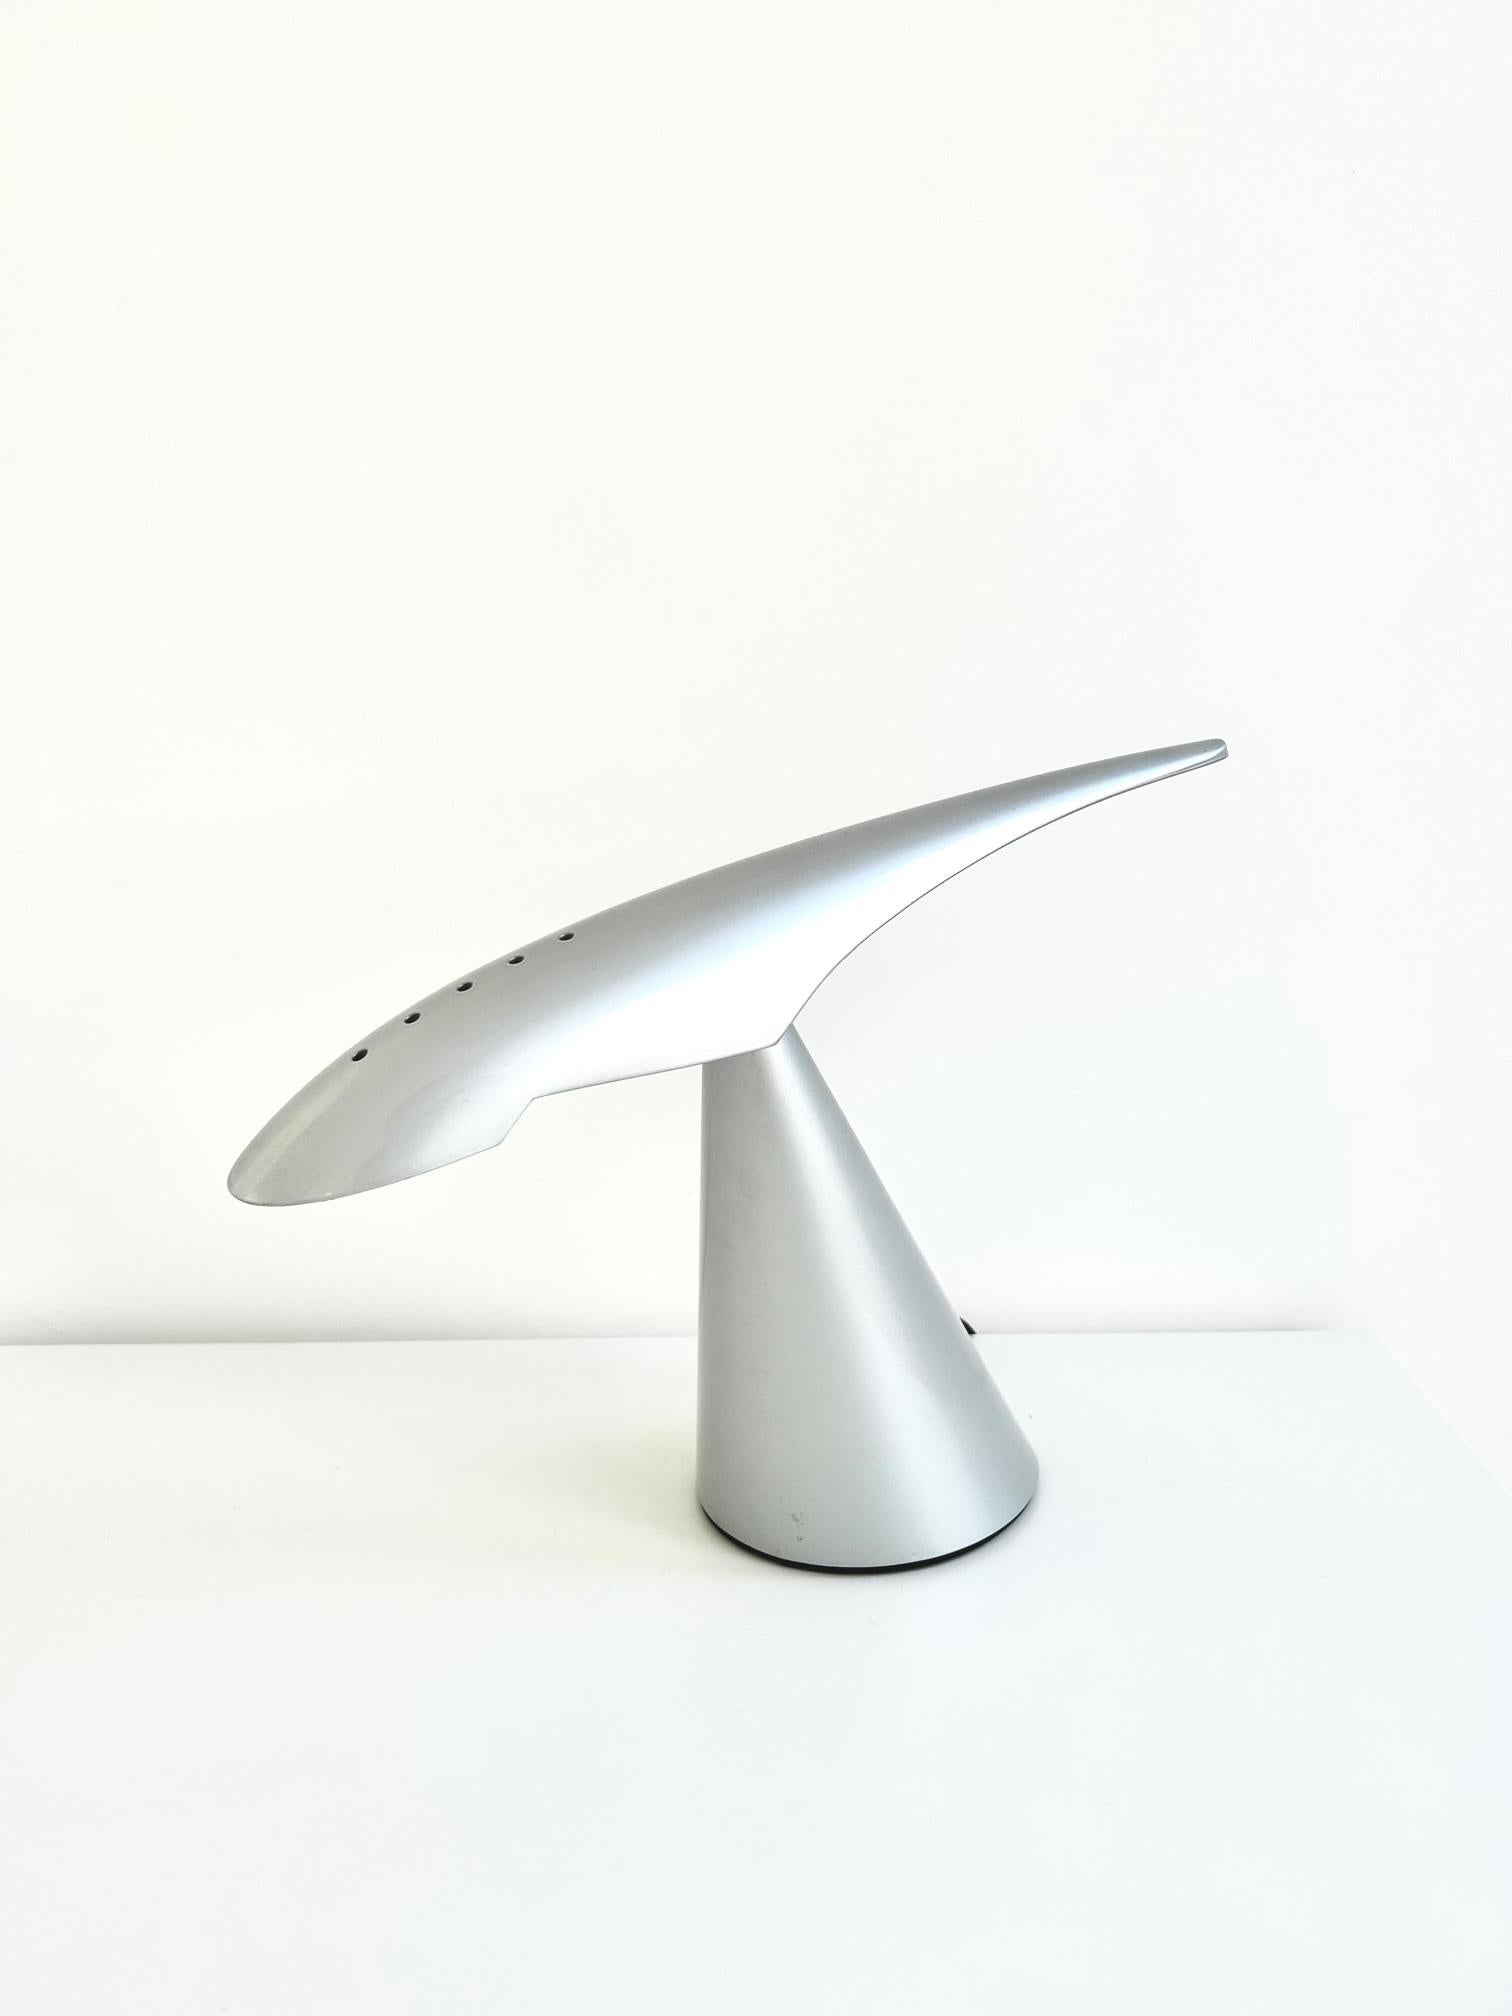 Pair of Ran Desk Lamps, Peter Naumann, ClassiCon, 1990s For Sale 8